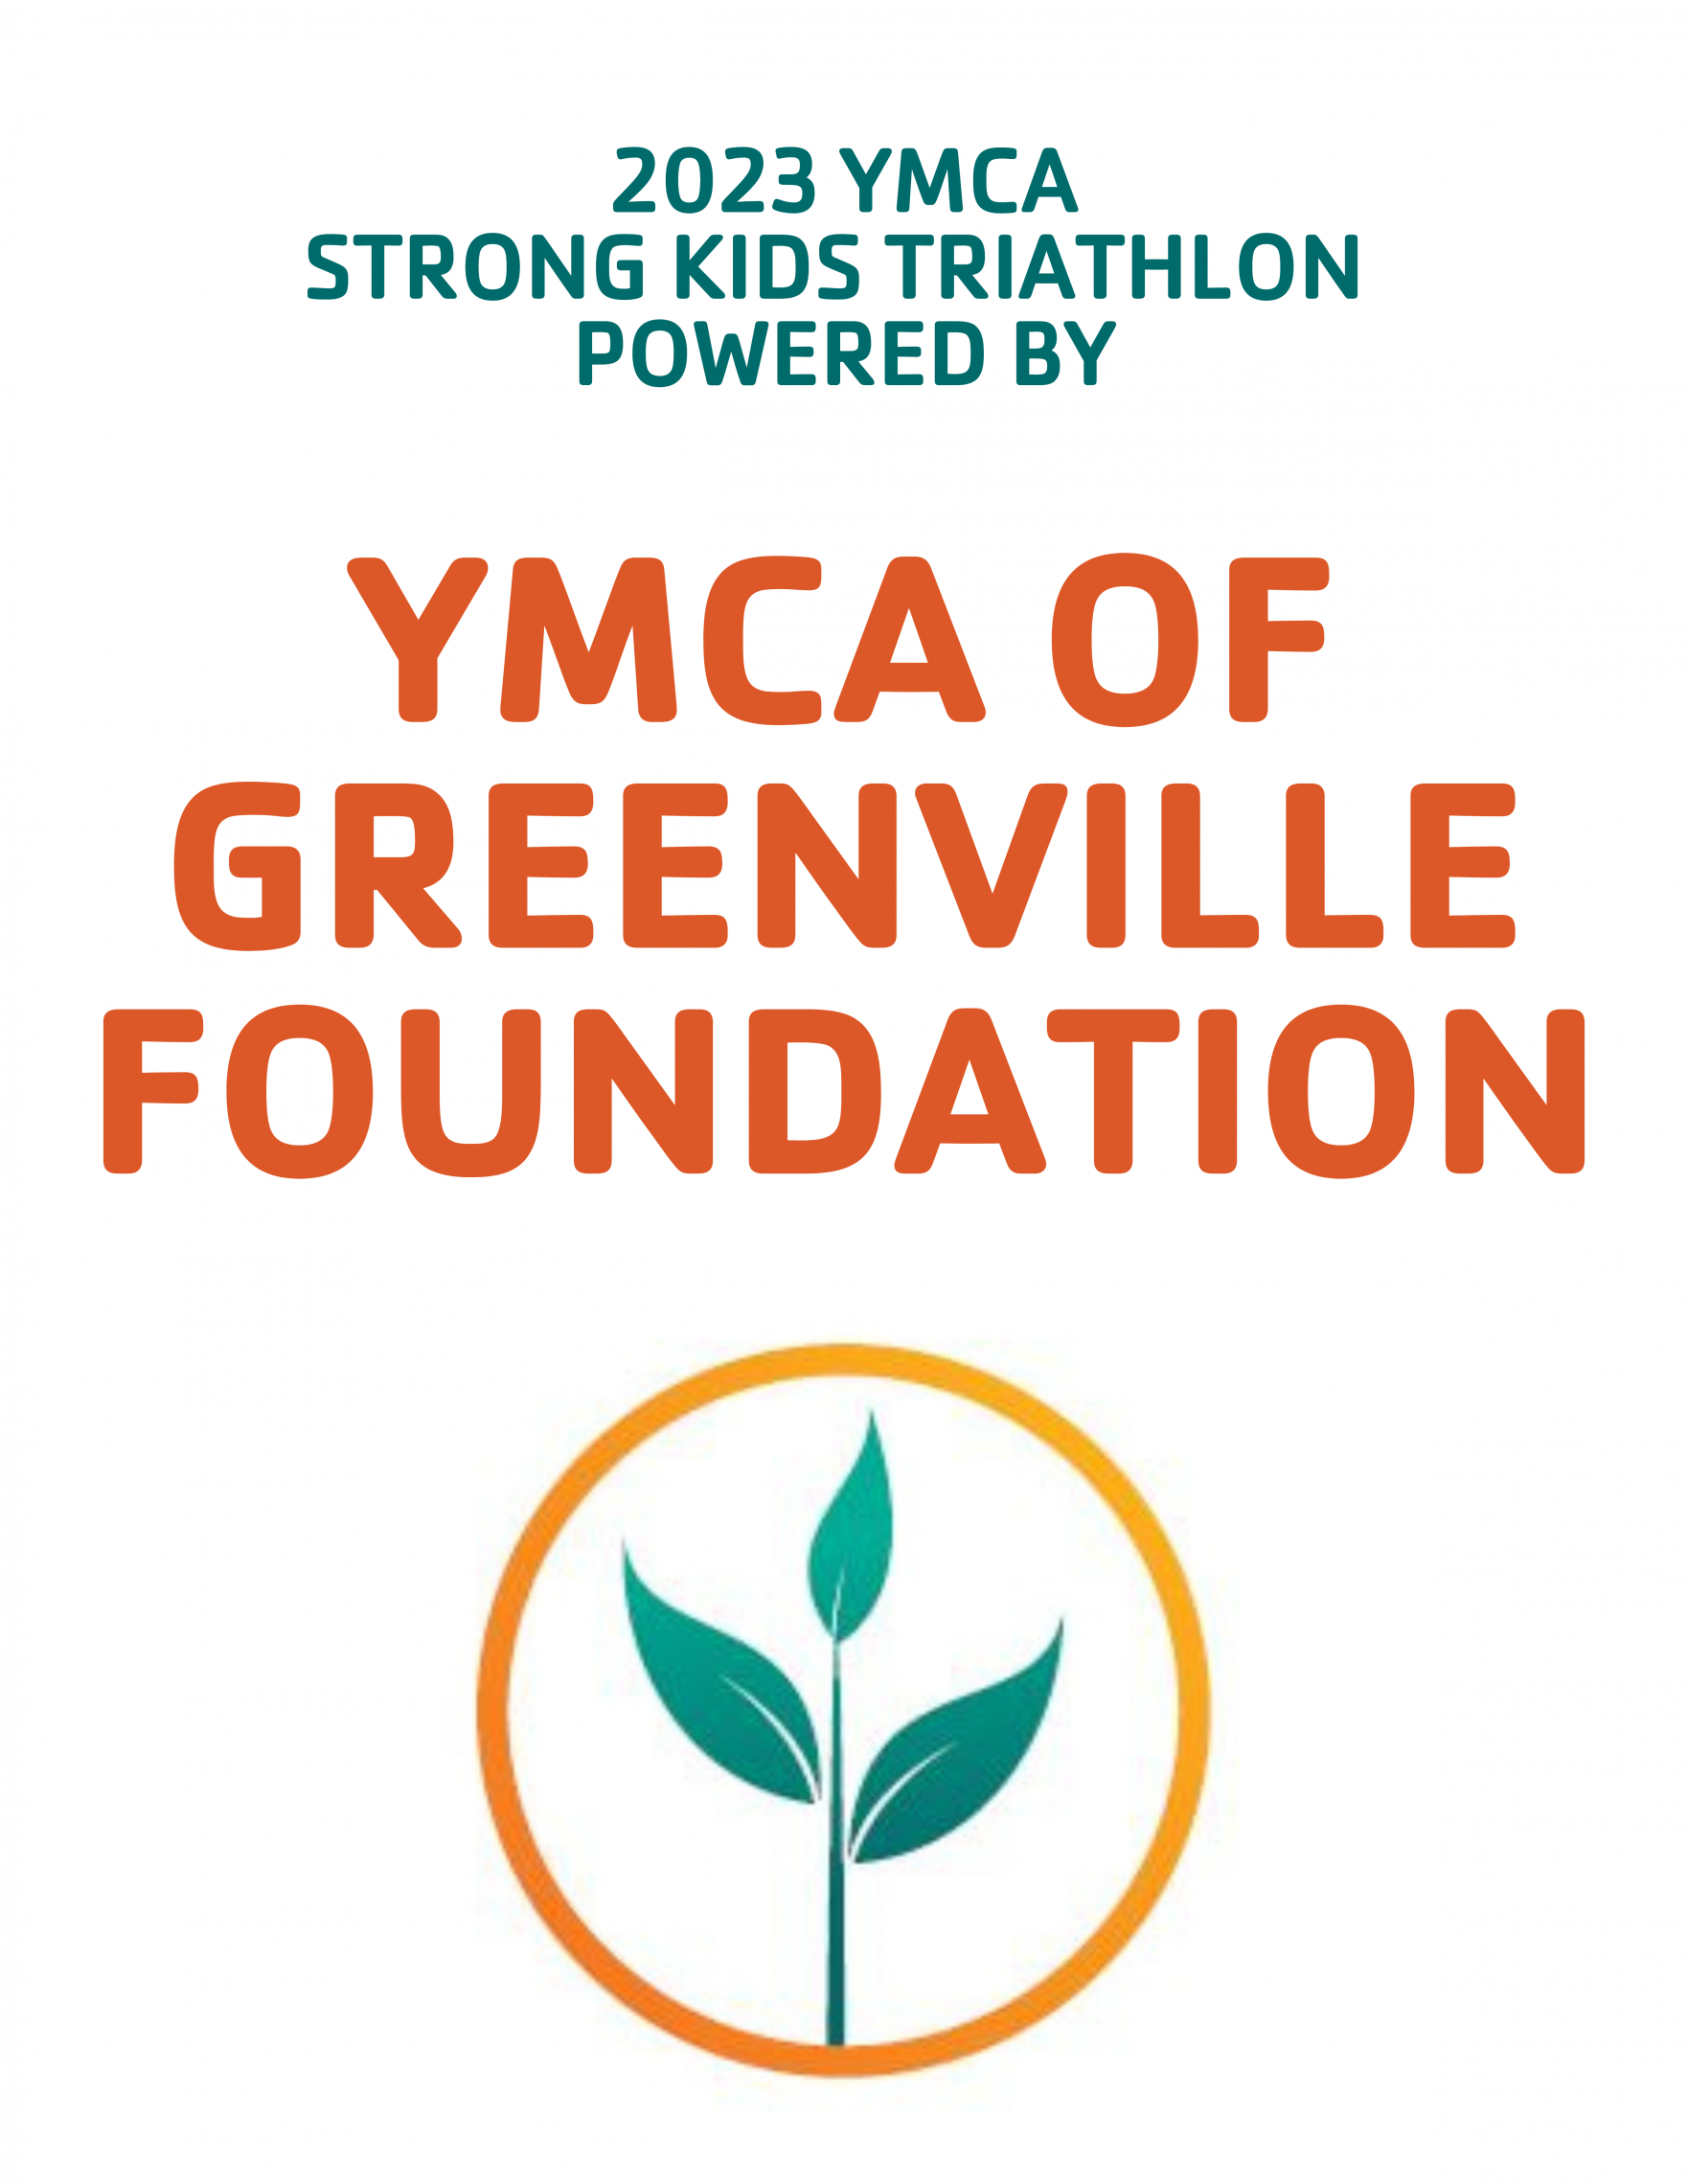 Powered by YMCA of Greenville Foundation